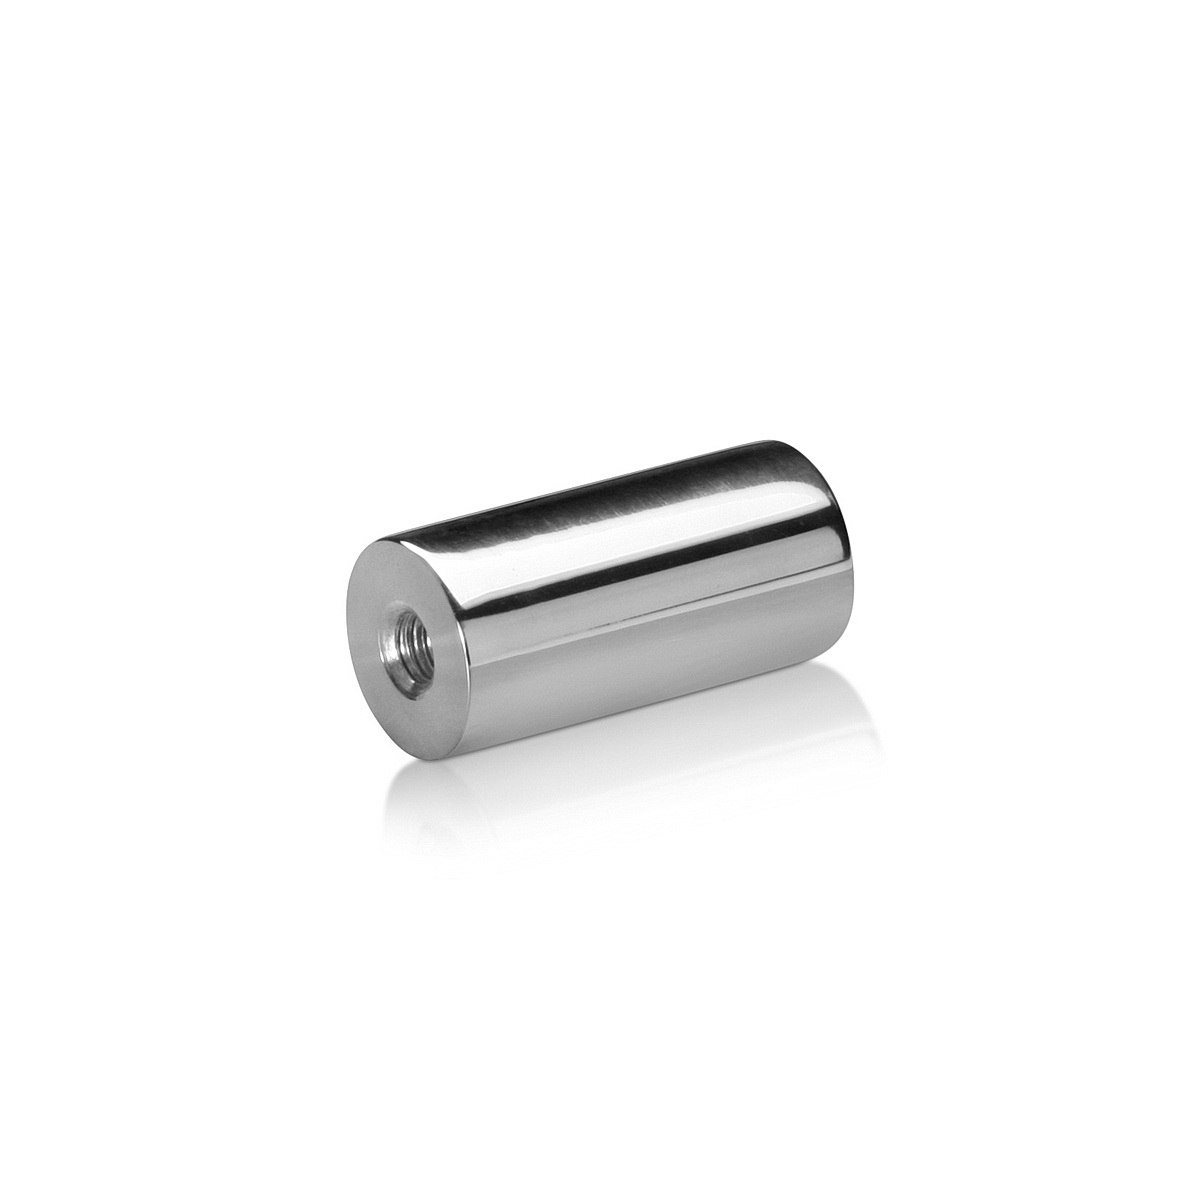 1/4-20 Threaded Barrels Diameter: 3/4'', Length: 1 1/2'', Polished Finish Grade 304 [Required Material Hole Size: 17/64'' ]